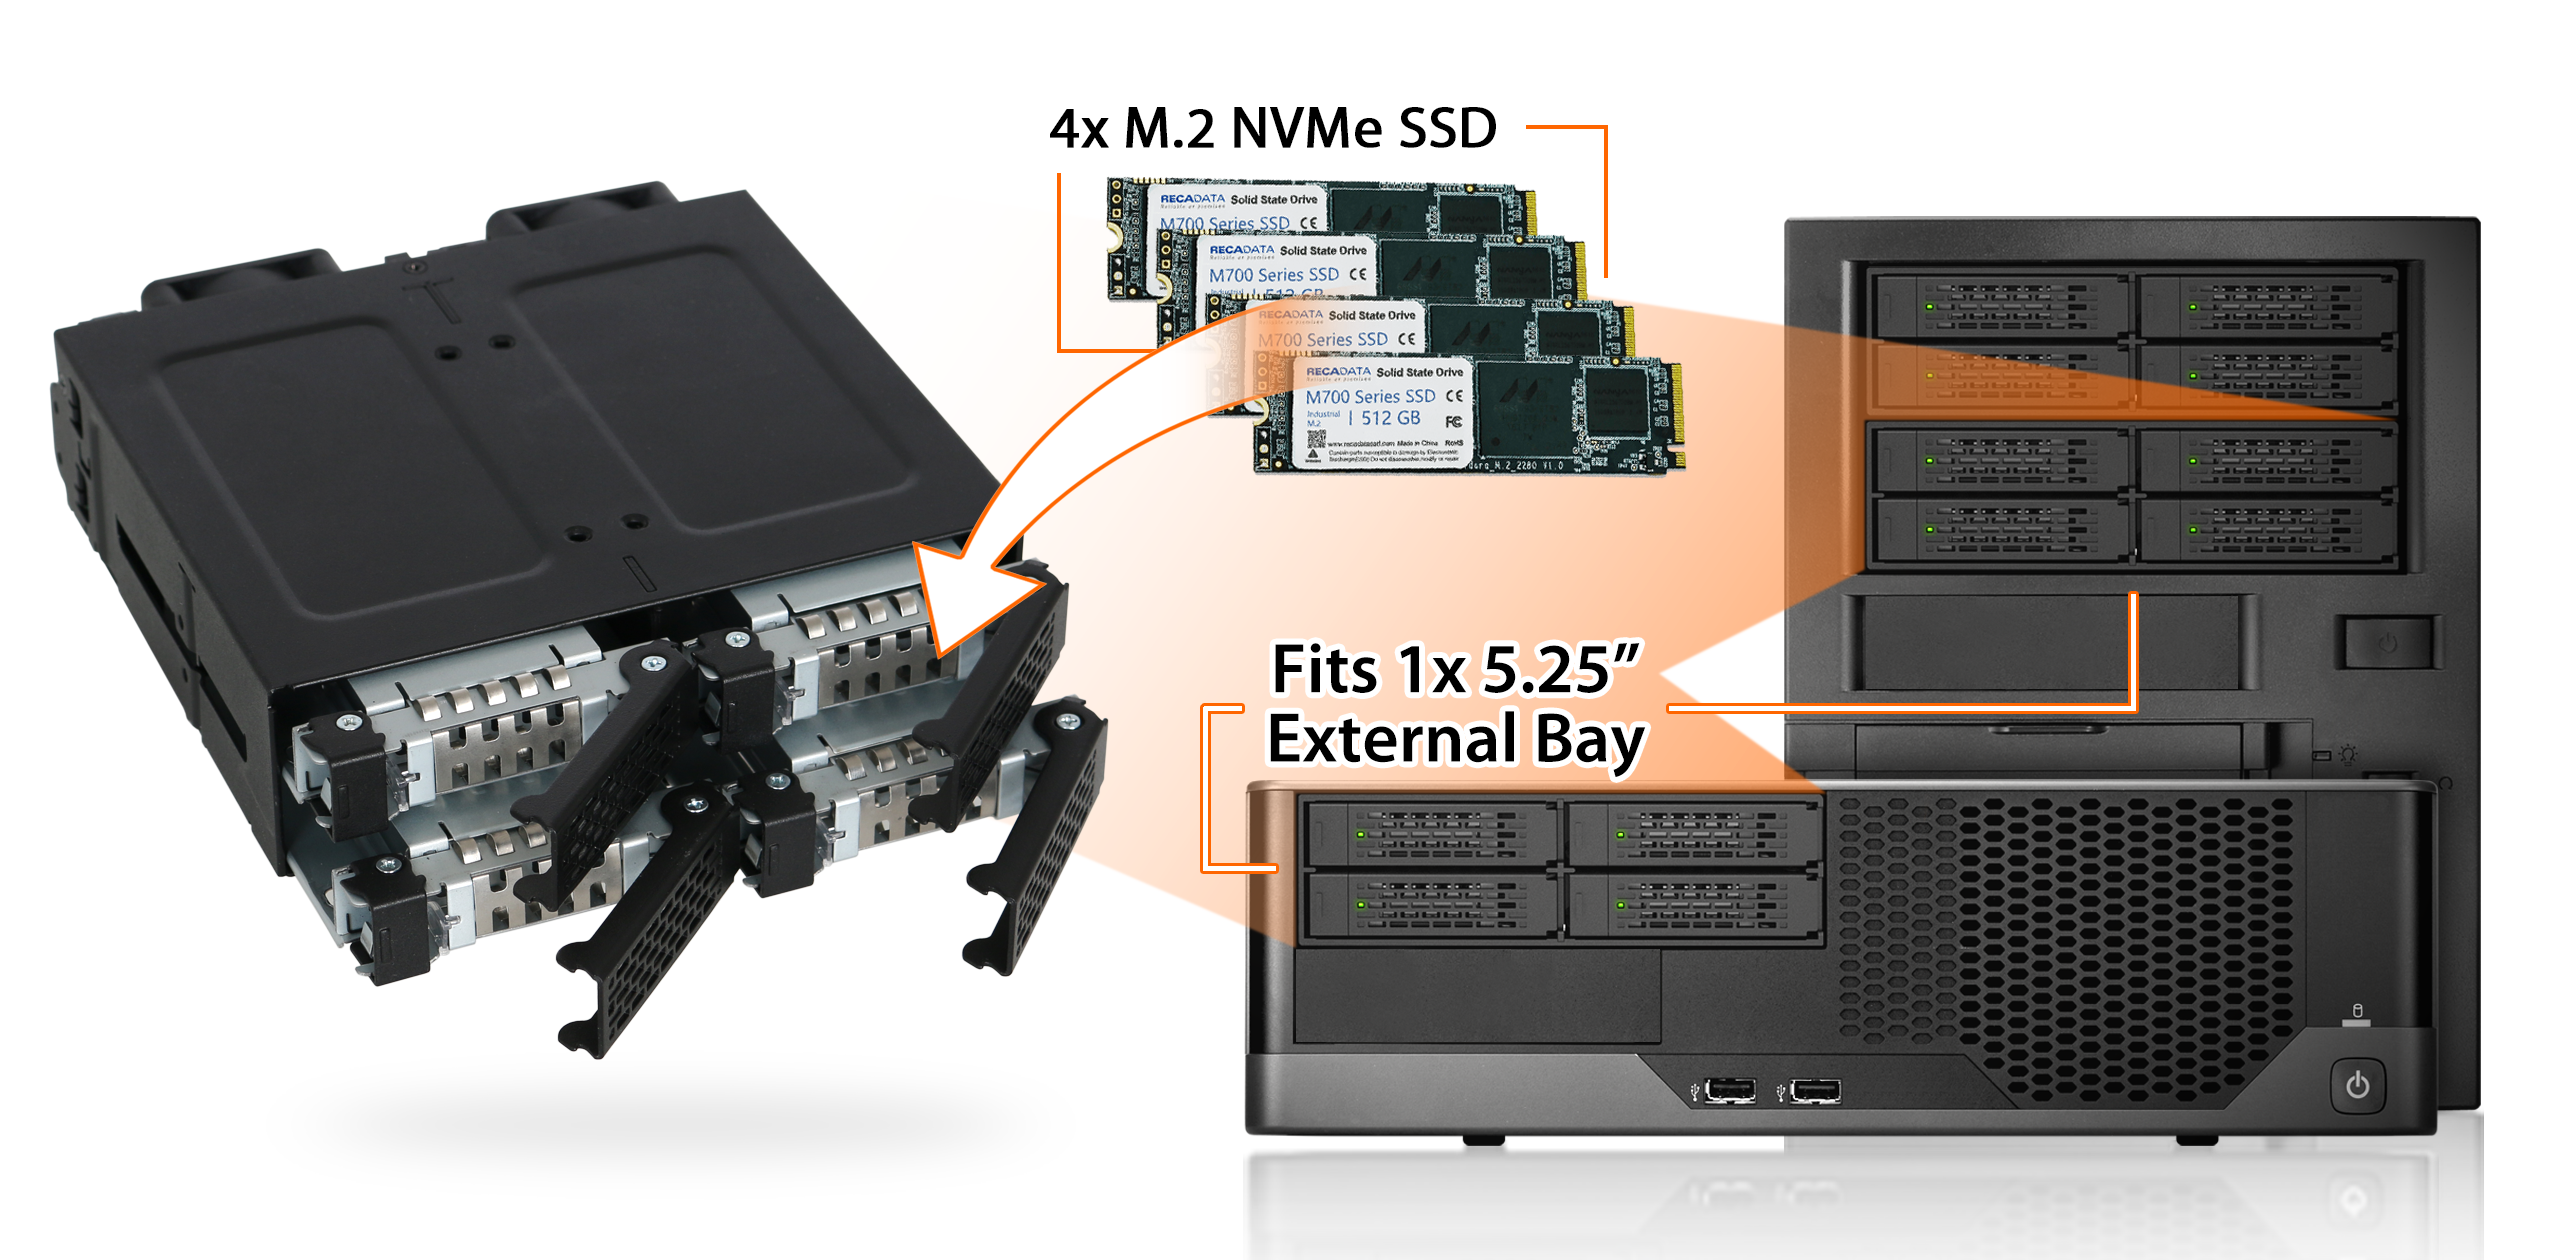 Concept Enclosure: How to make NVMe M.2 SSD Hot Swappable